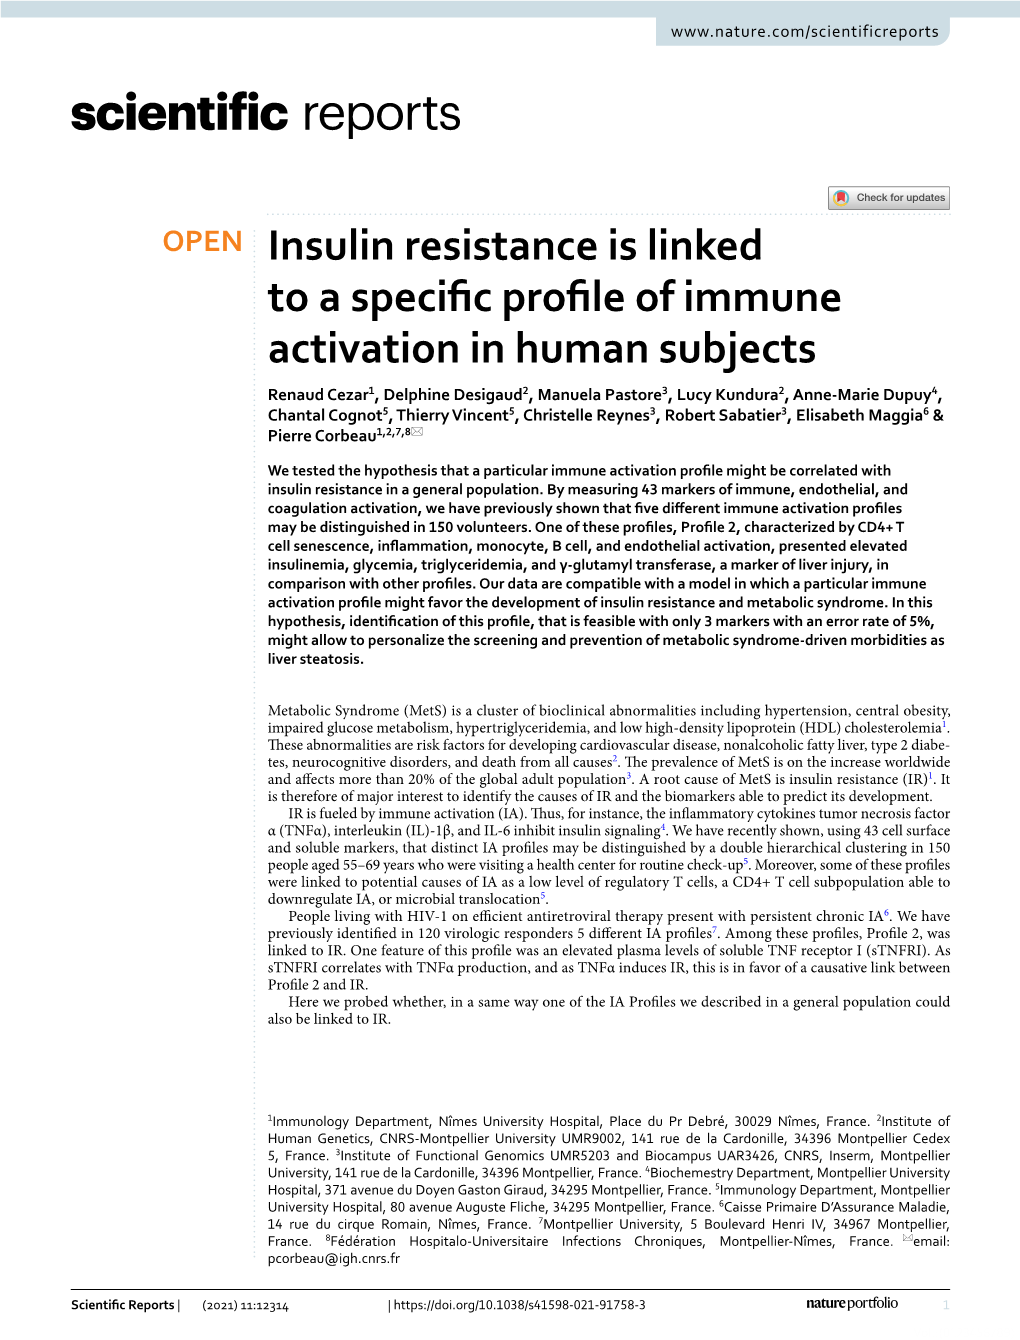 Insulin Resistance Is Linked to a Specific Profile of Immune Activation in Human Subjects